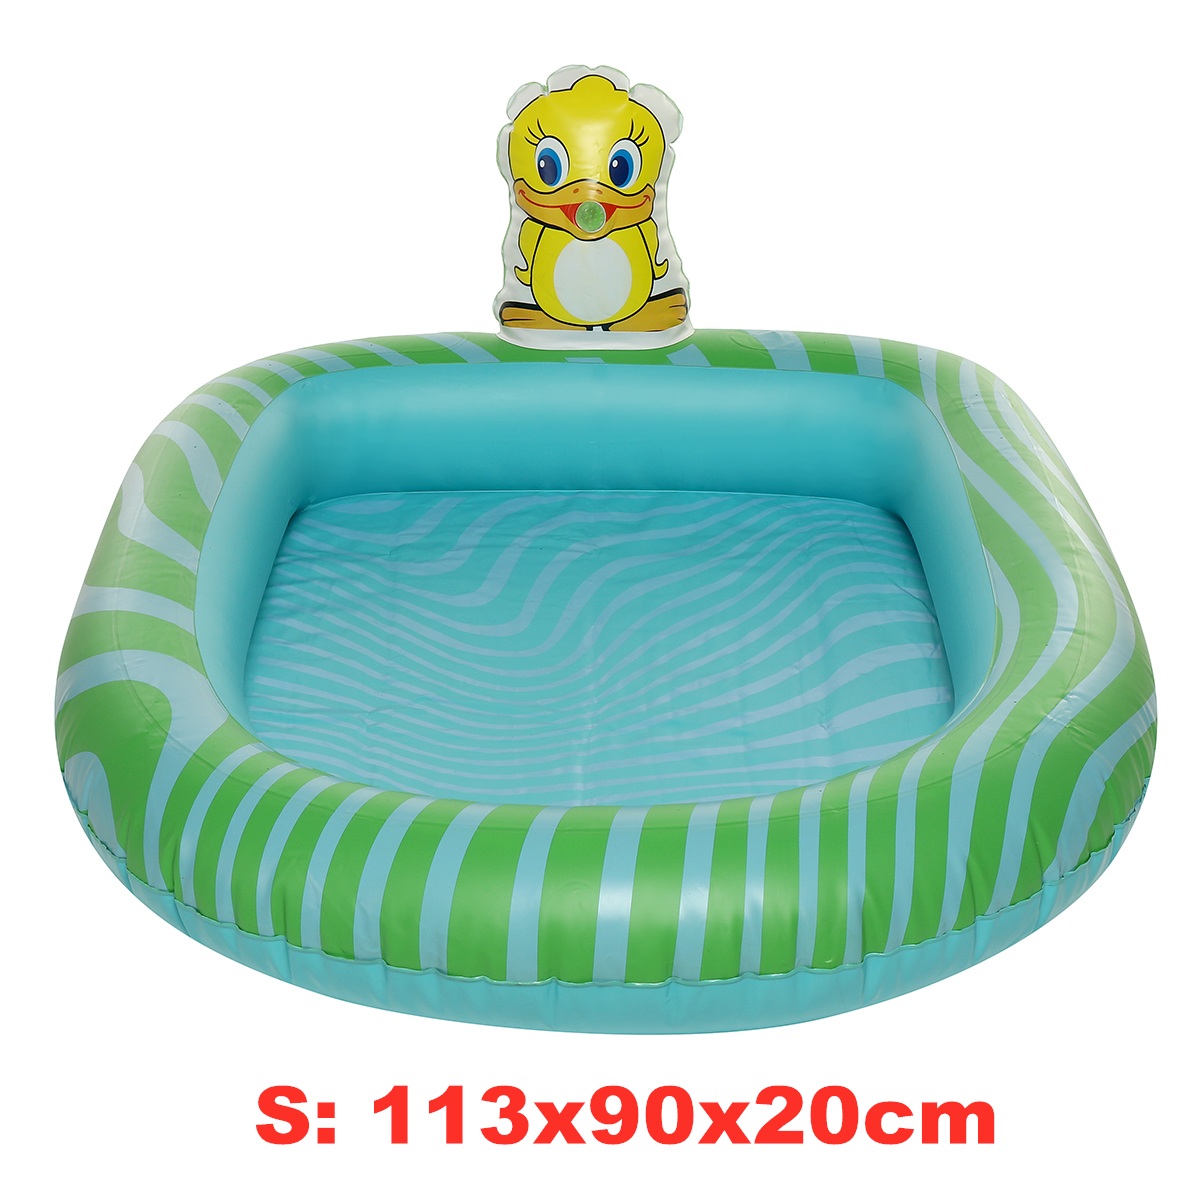 PVC-Children-Inflatable-Swimming-Pool-Sprinkler-Pool-Thickened-Cartoon-Pattern-Outdoor-Swimming-Wate-1851764-5